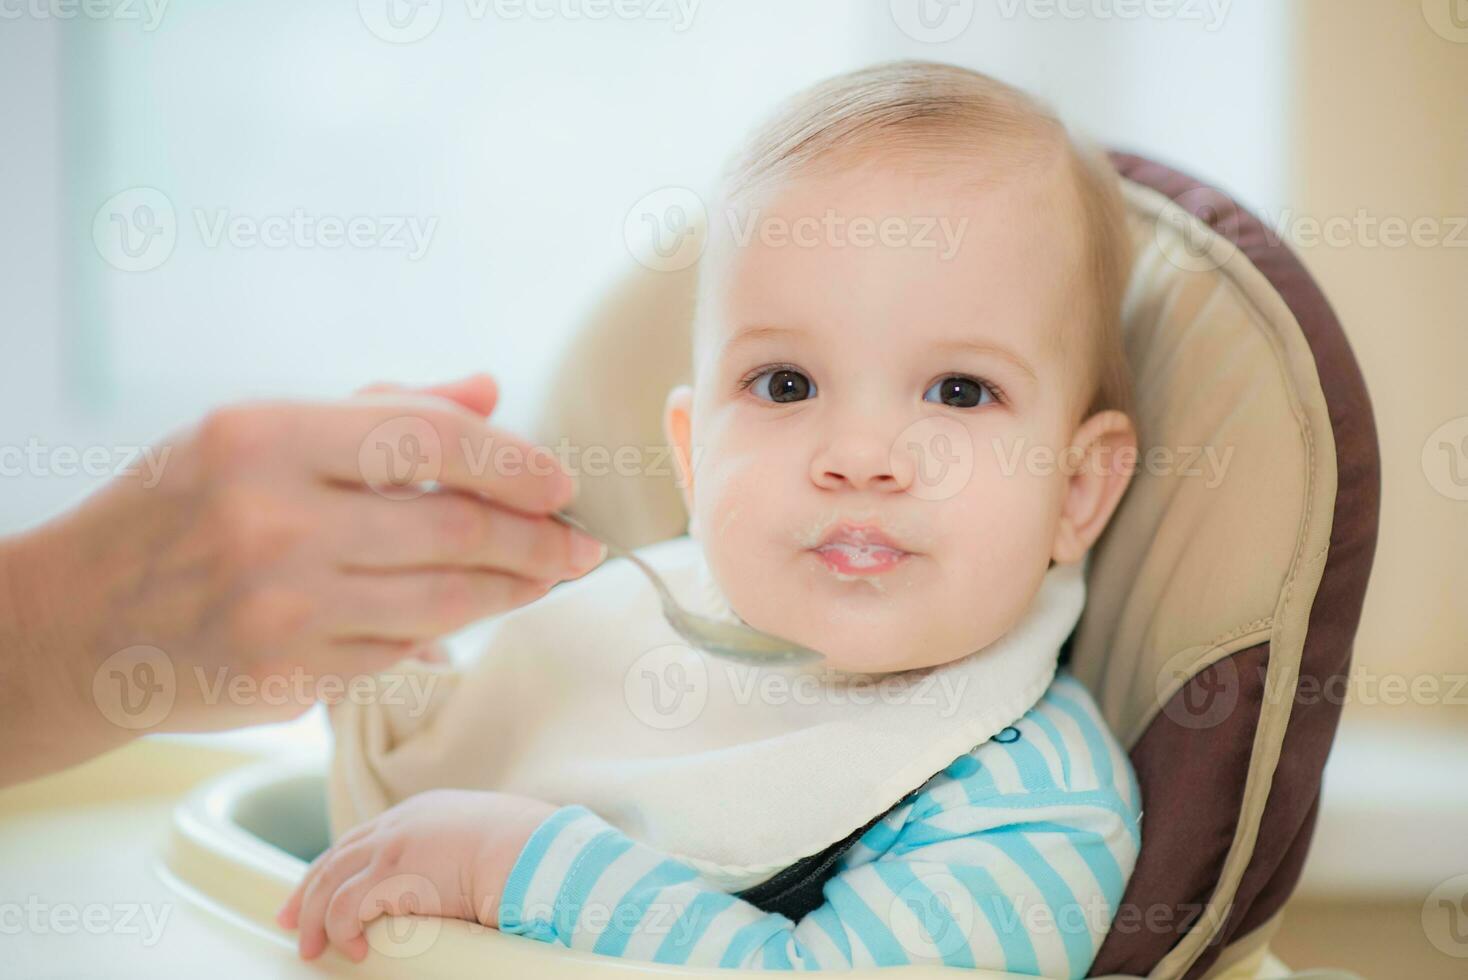 grandmother gives baby food from a spoon photo